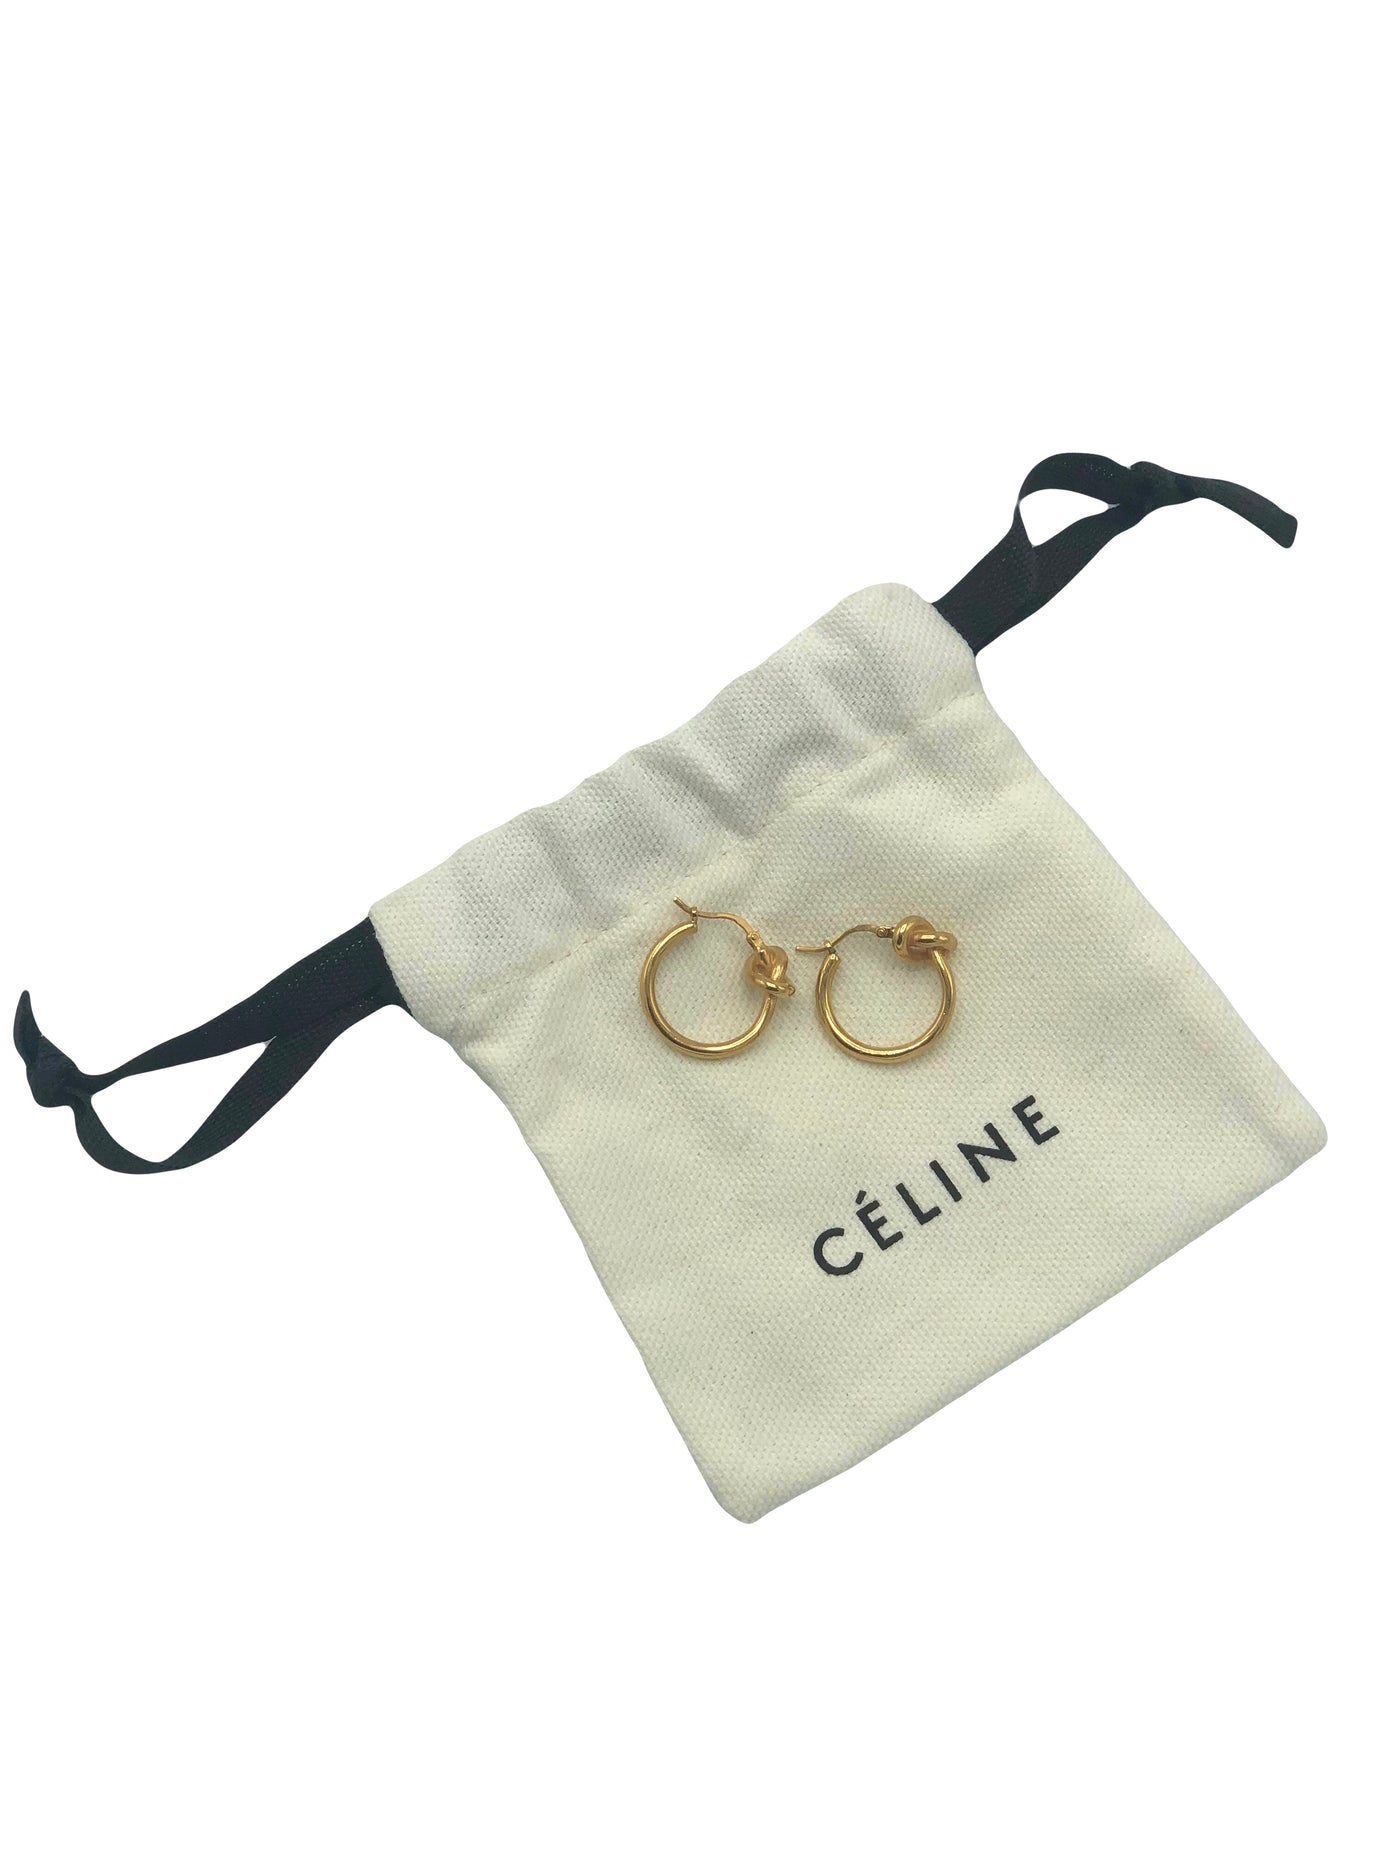 CELINE Knot Small Hoops current RRP: £355